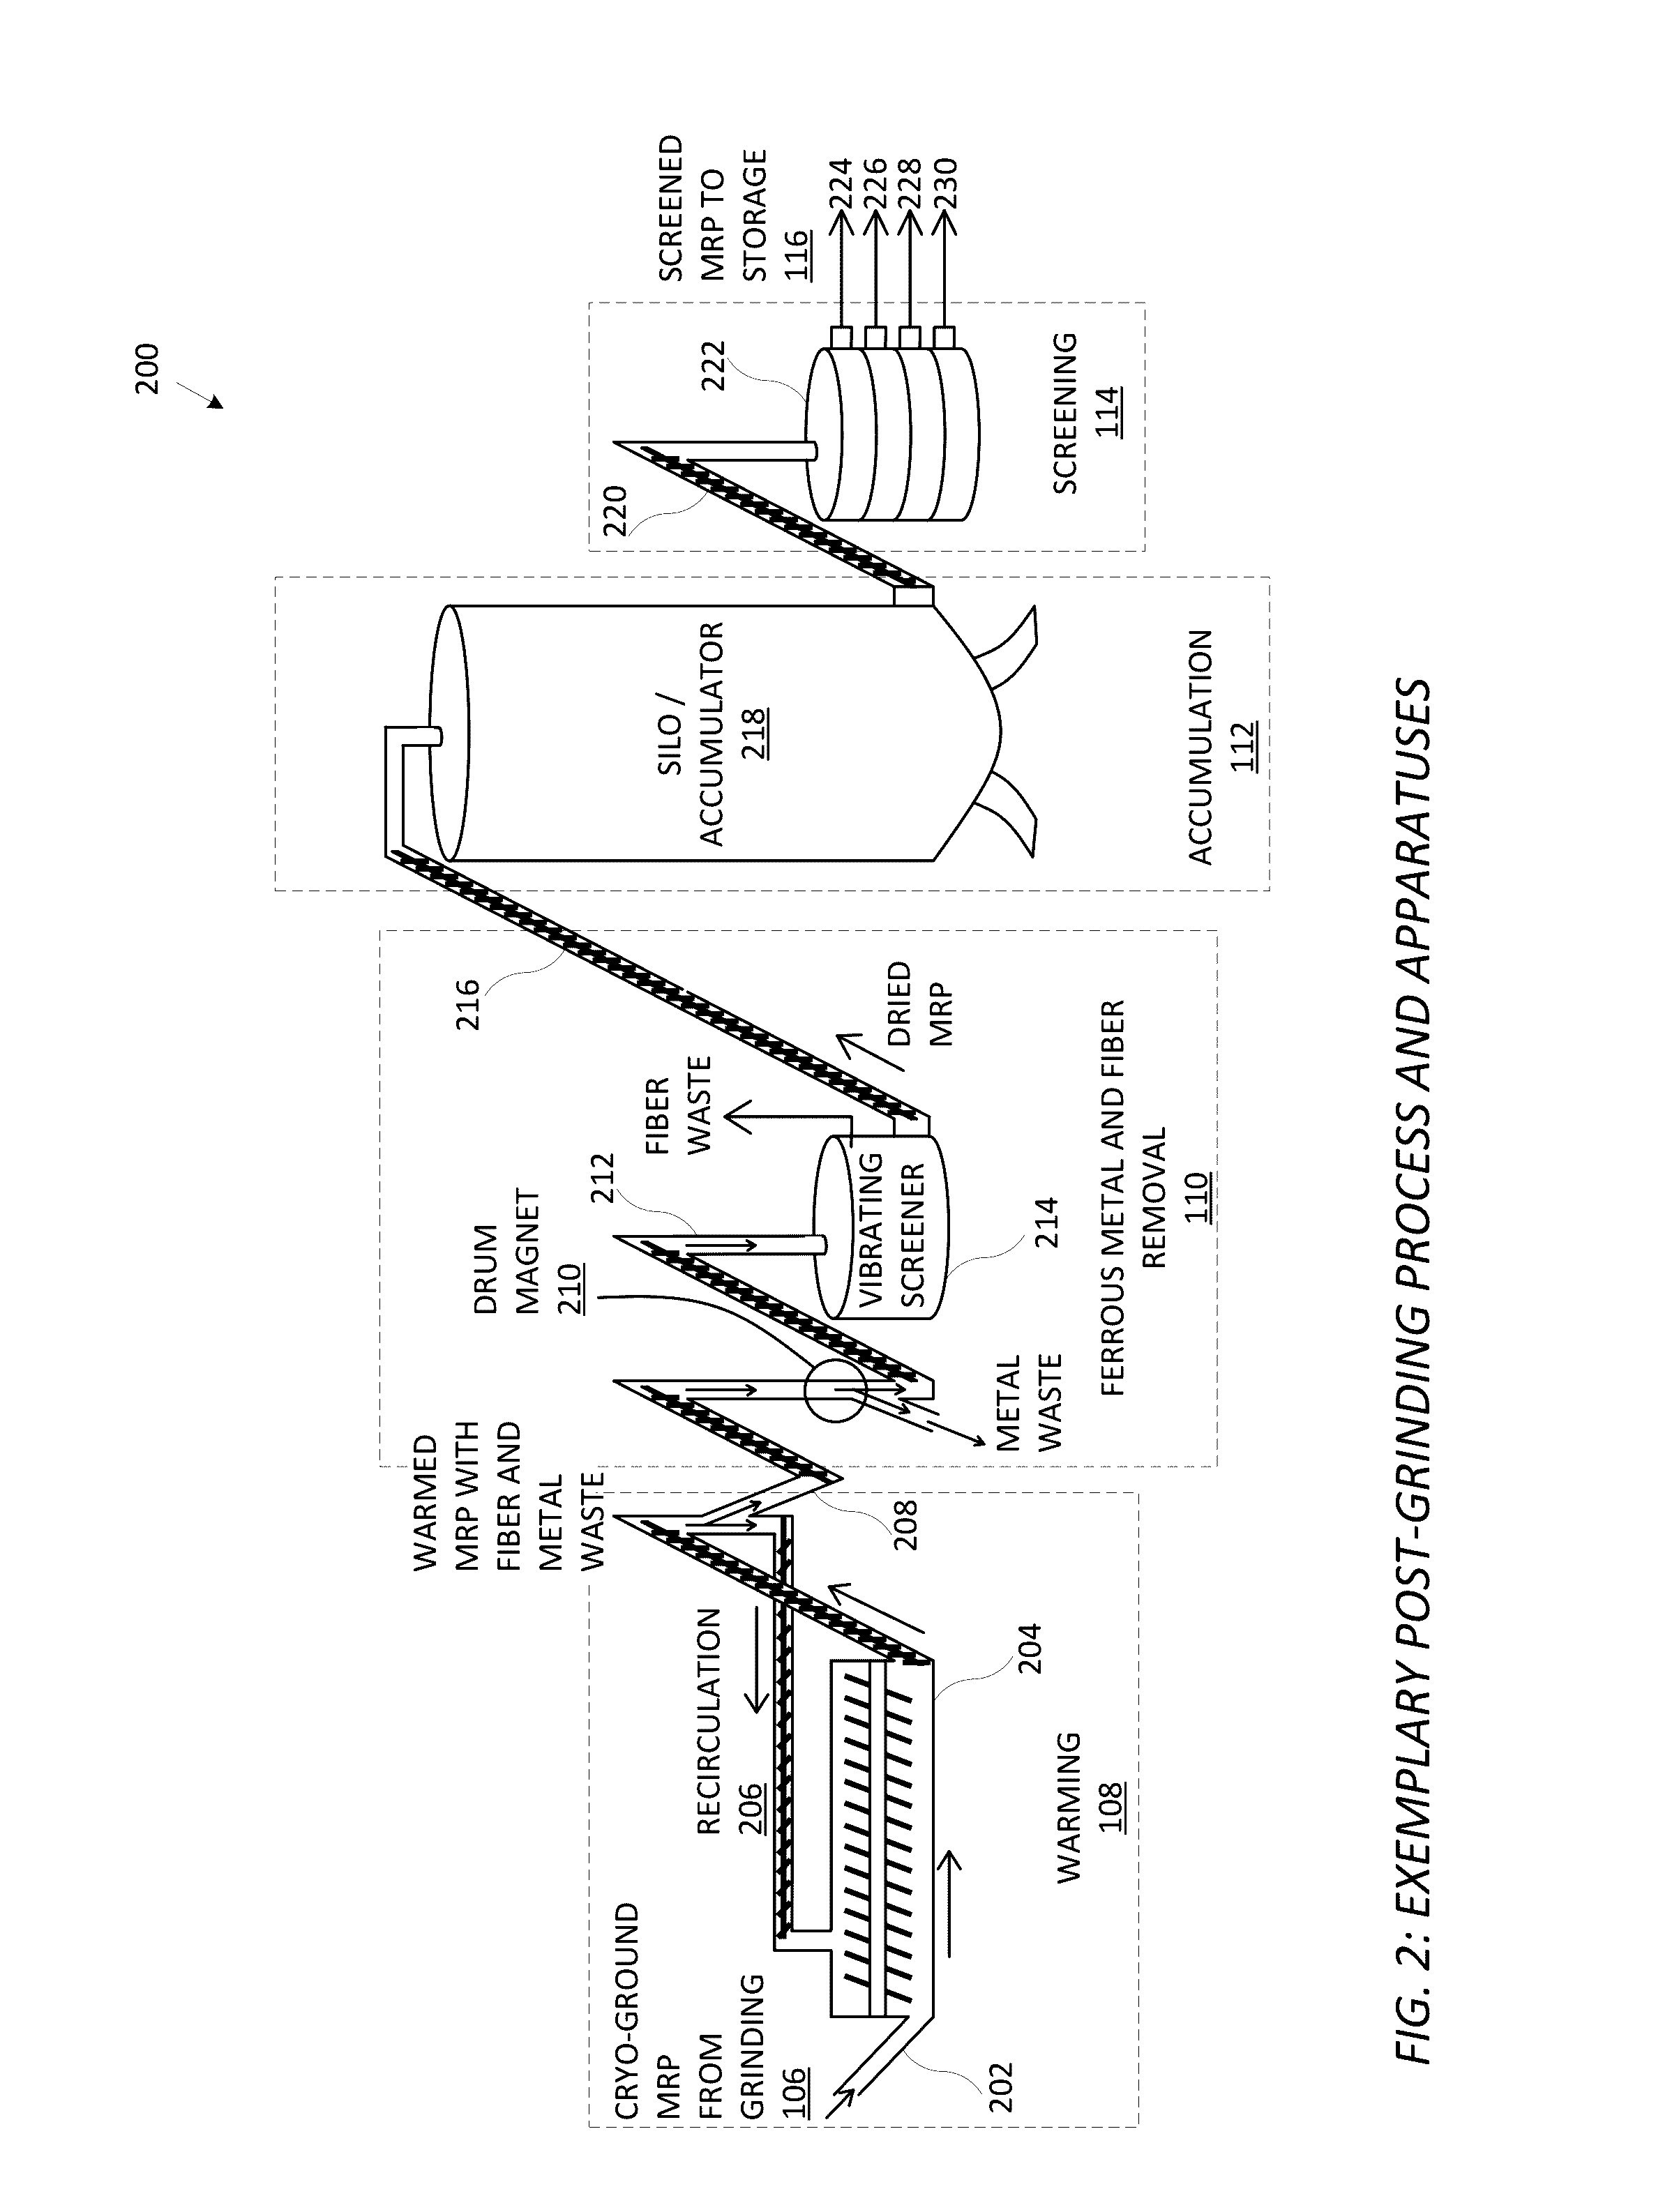 Systems, methods, and apparatuses for manufacturing micronized powder